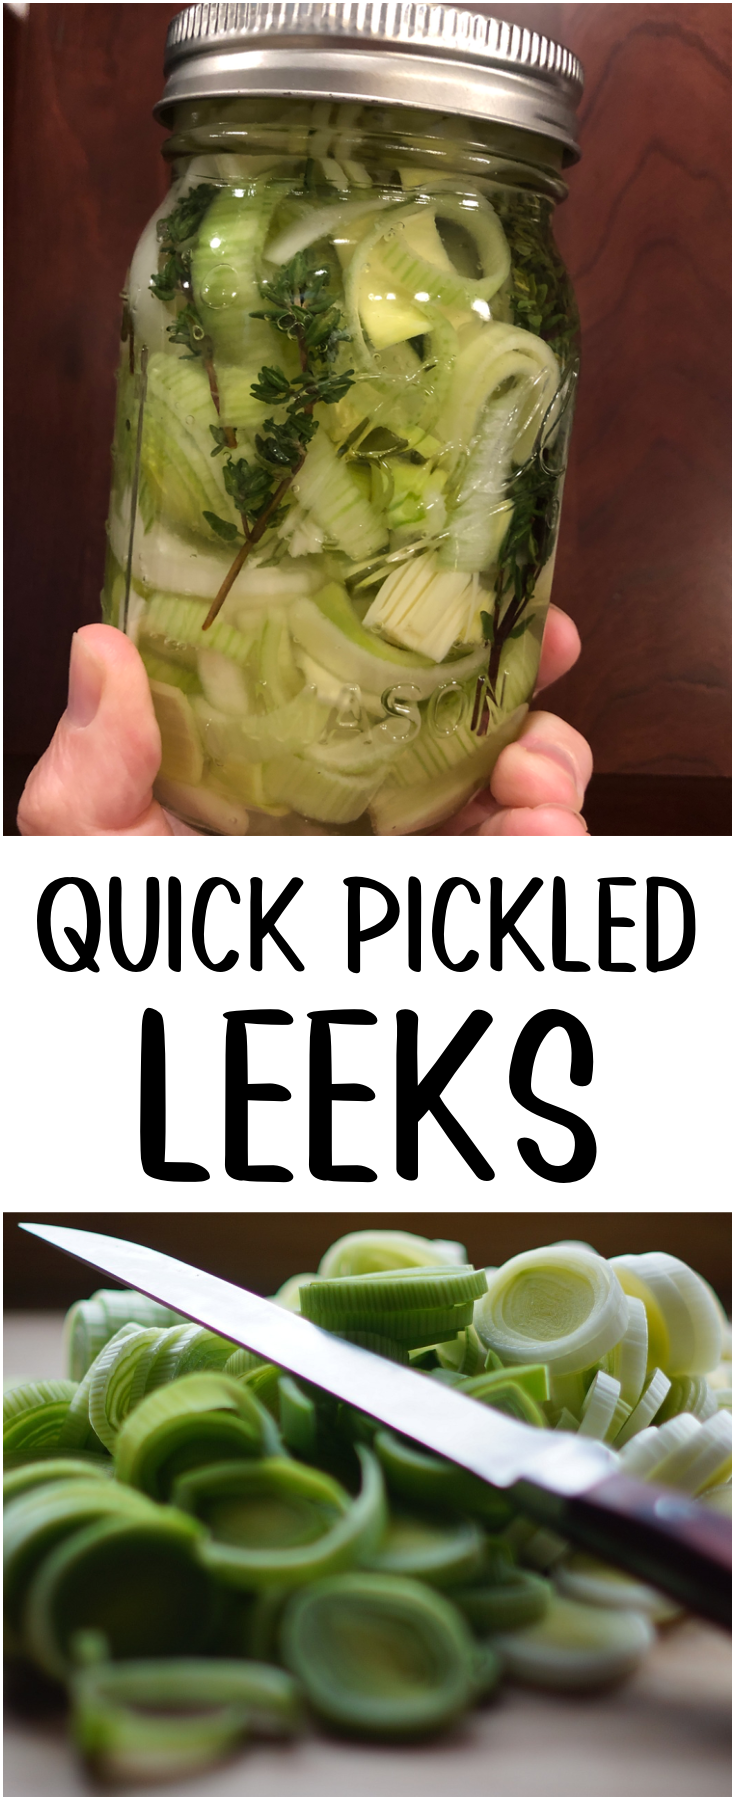 Use up an abundance of leeks to make these Quick Pickled Leeks in a hurry - a few simple ingredients come together nicely for a topping on your favorite dish!